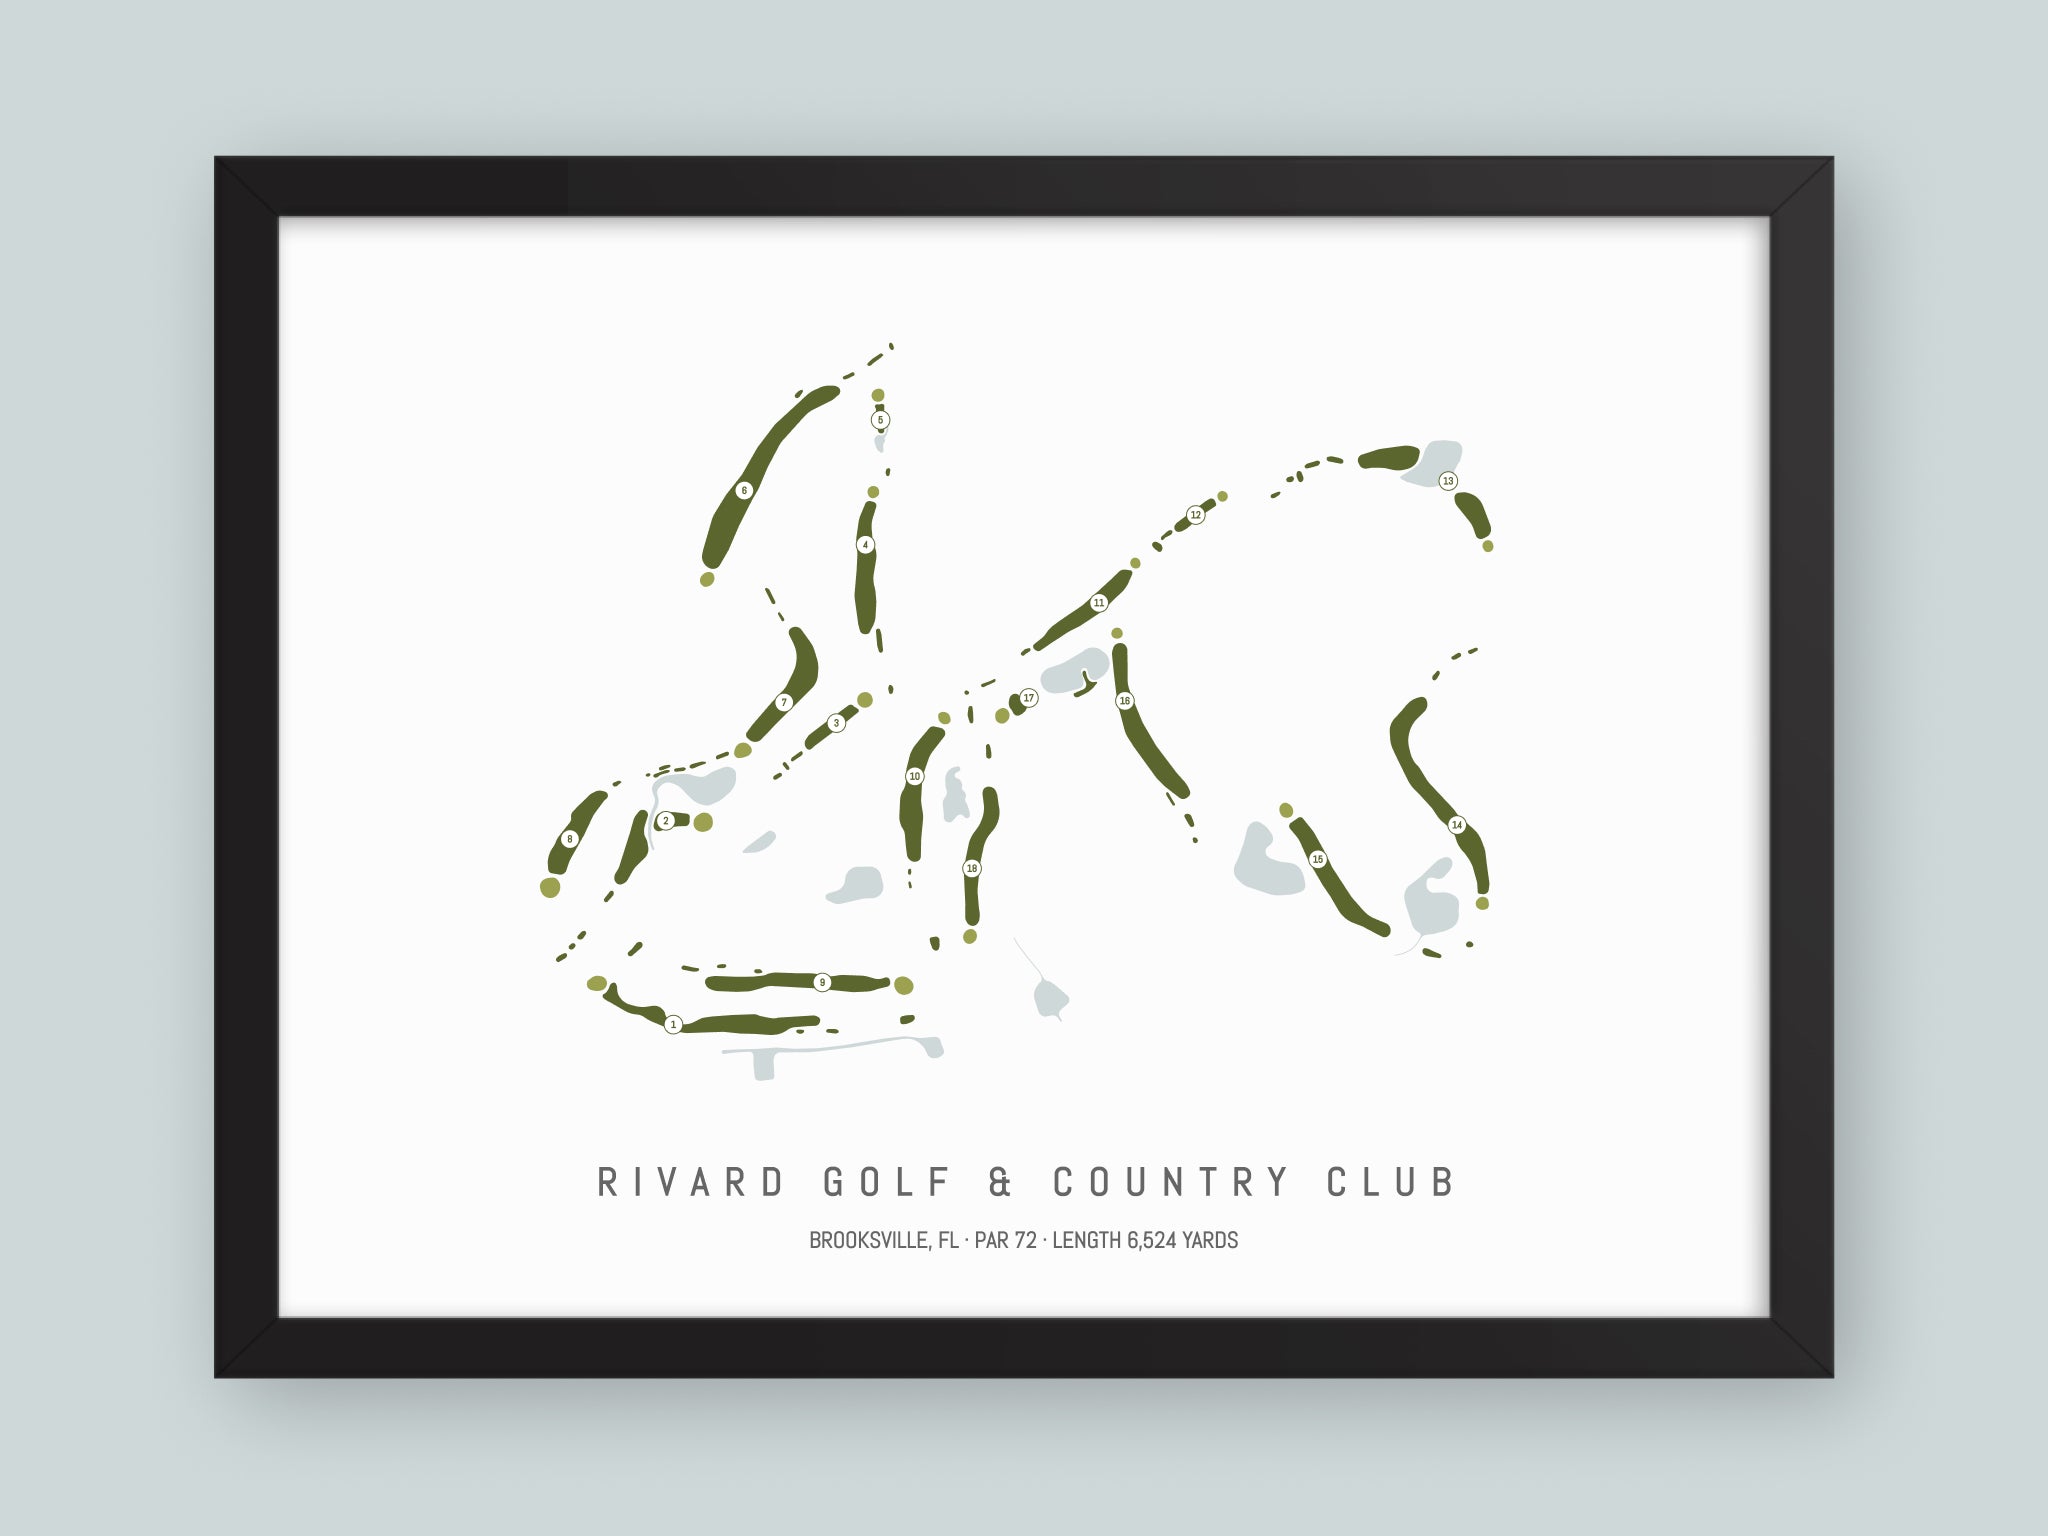 Rivard-Golf-And-Country-Club-FL--Black-Frame-24x18-With-Hole-Numbers